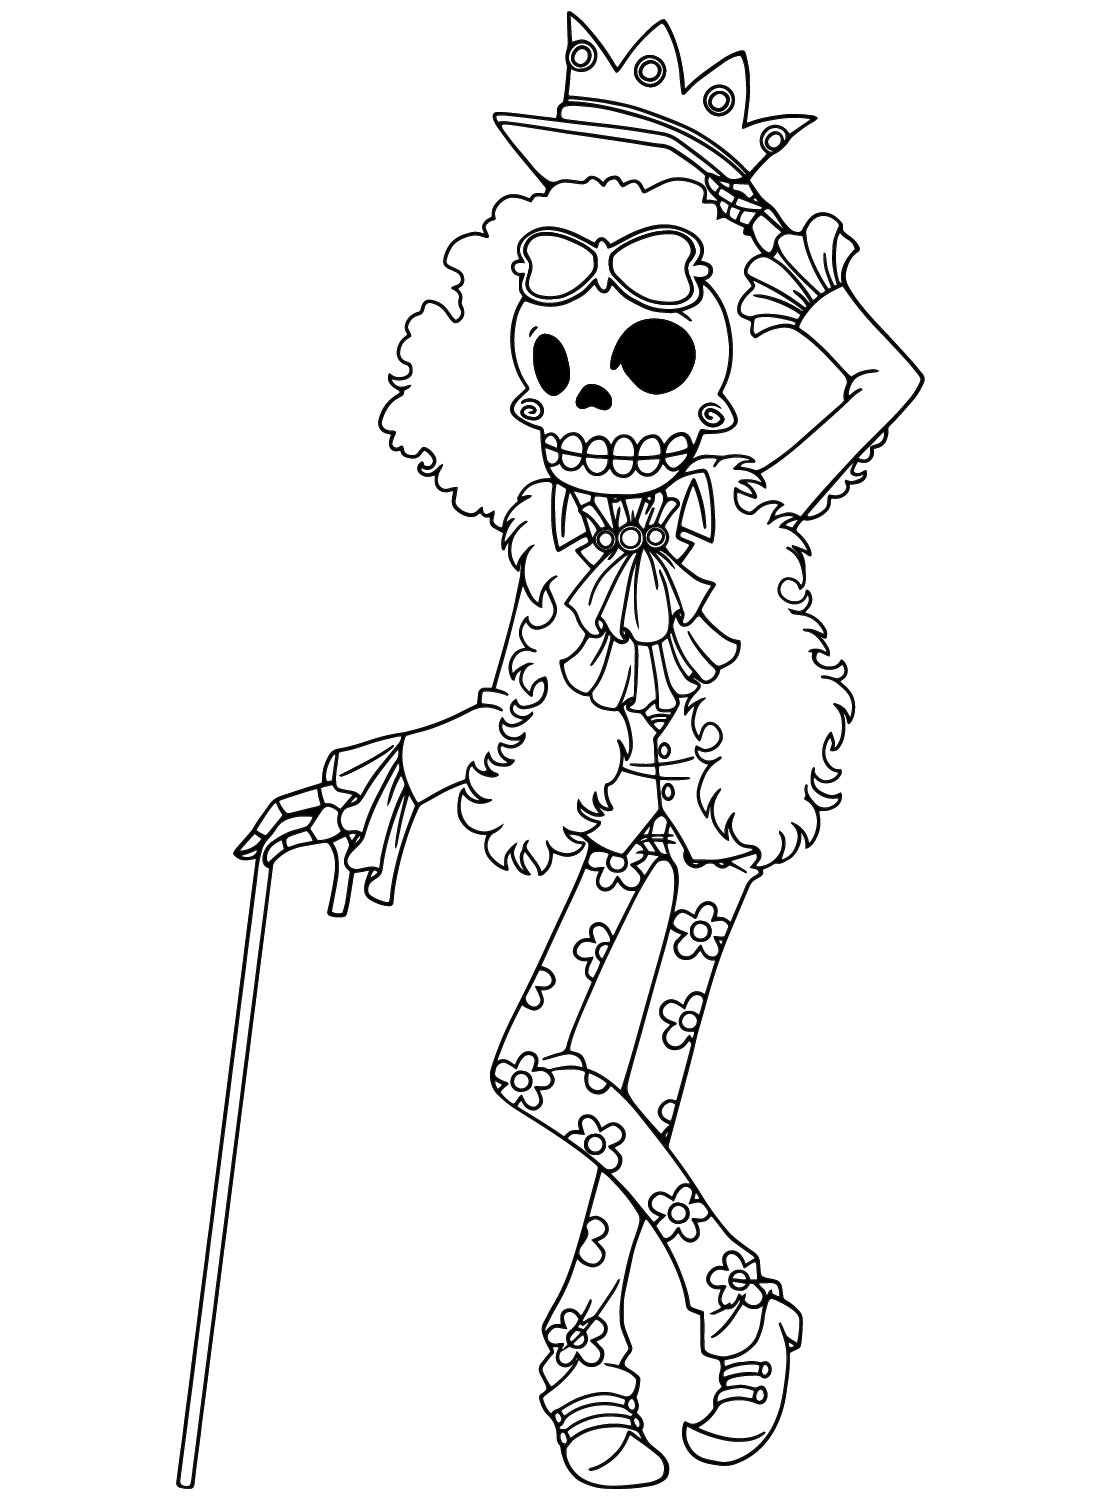 Brook Coloring Sheet for Kids from Brook